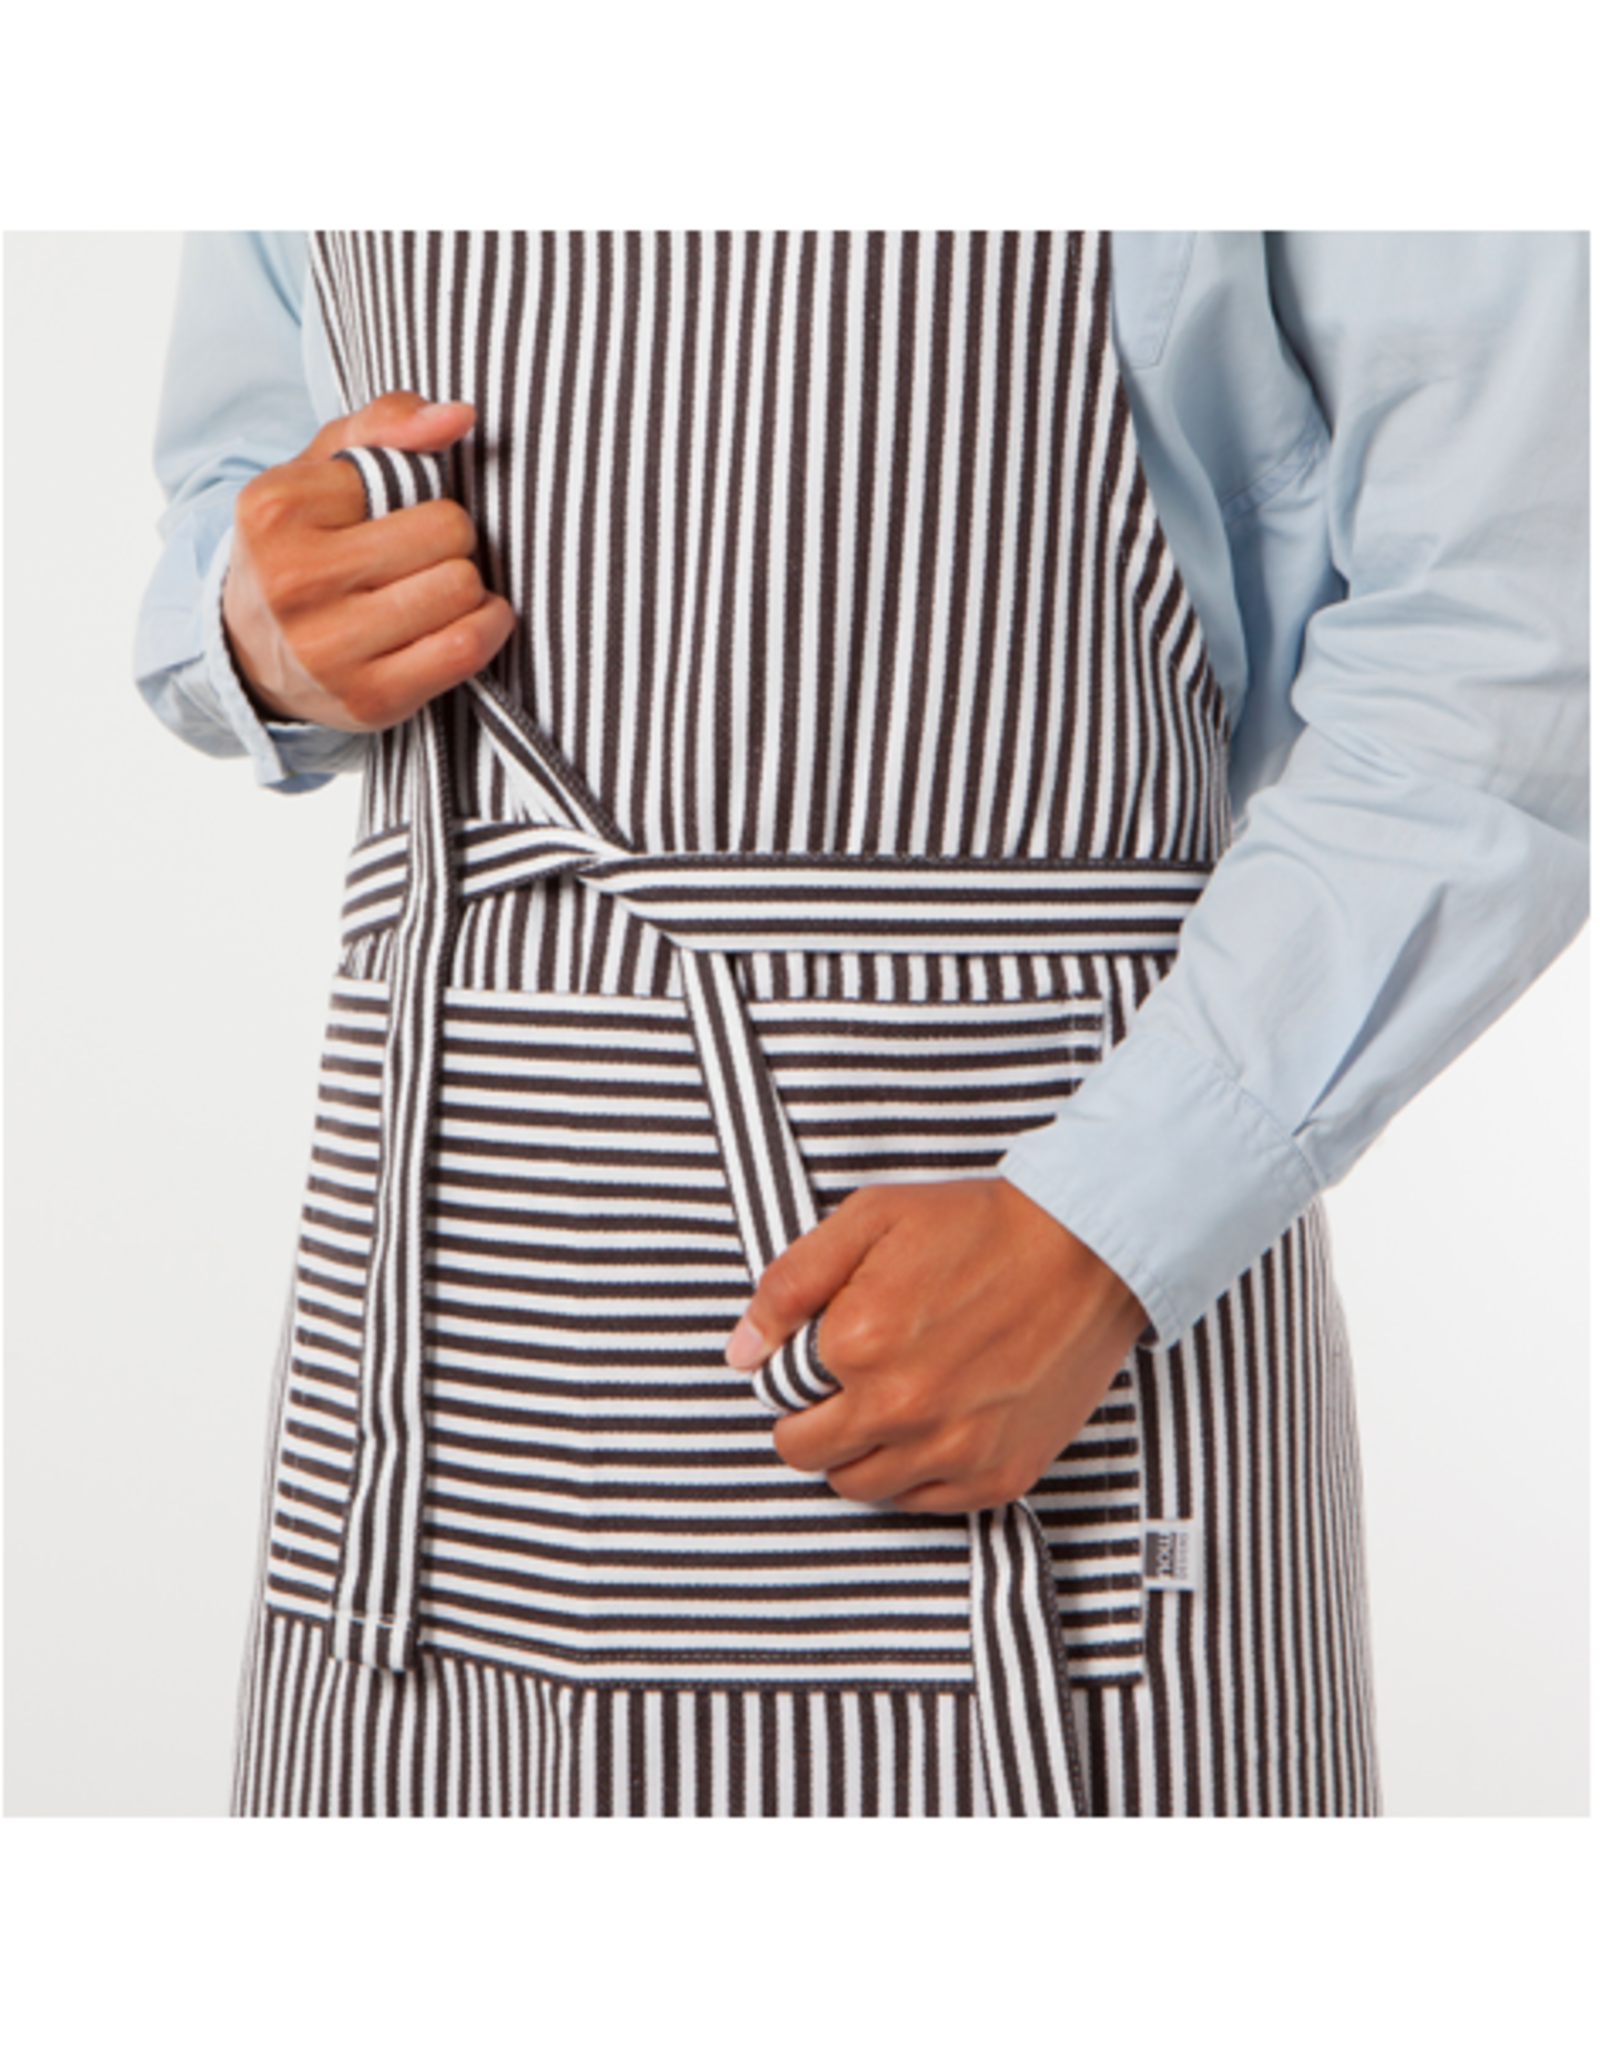 The Independent Mercantile Co. DCA - Classic Apron / Thin Stripe, Black